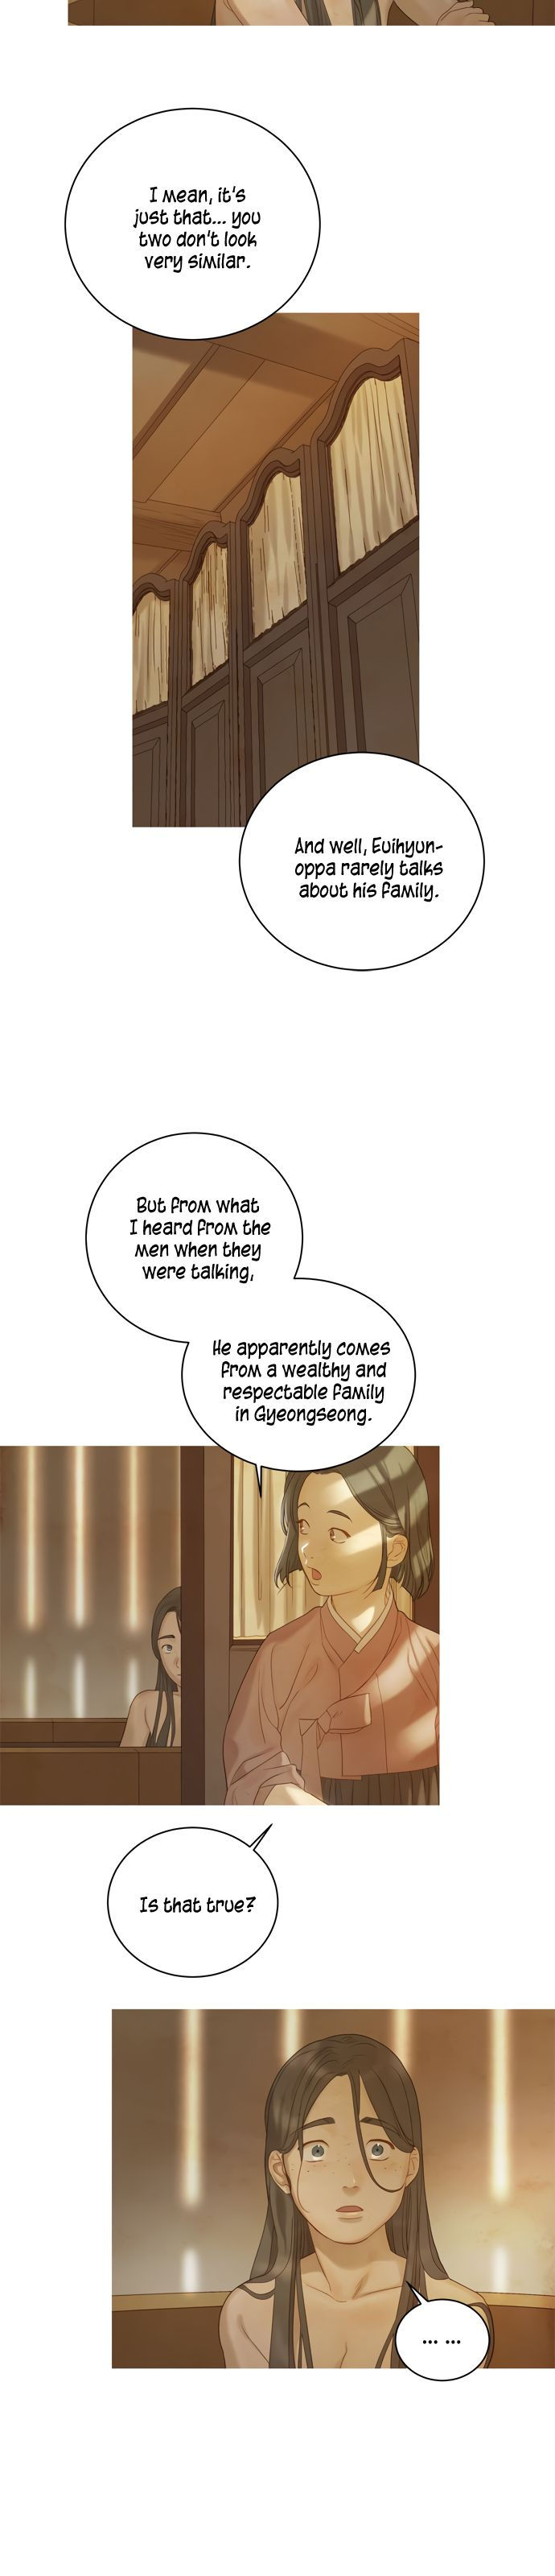 Gorae Byul - The Gyeongseong Mermaid - Chapter 20 Page 10